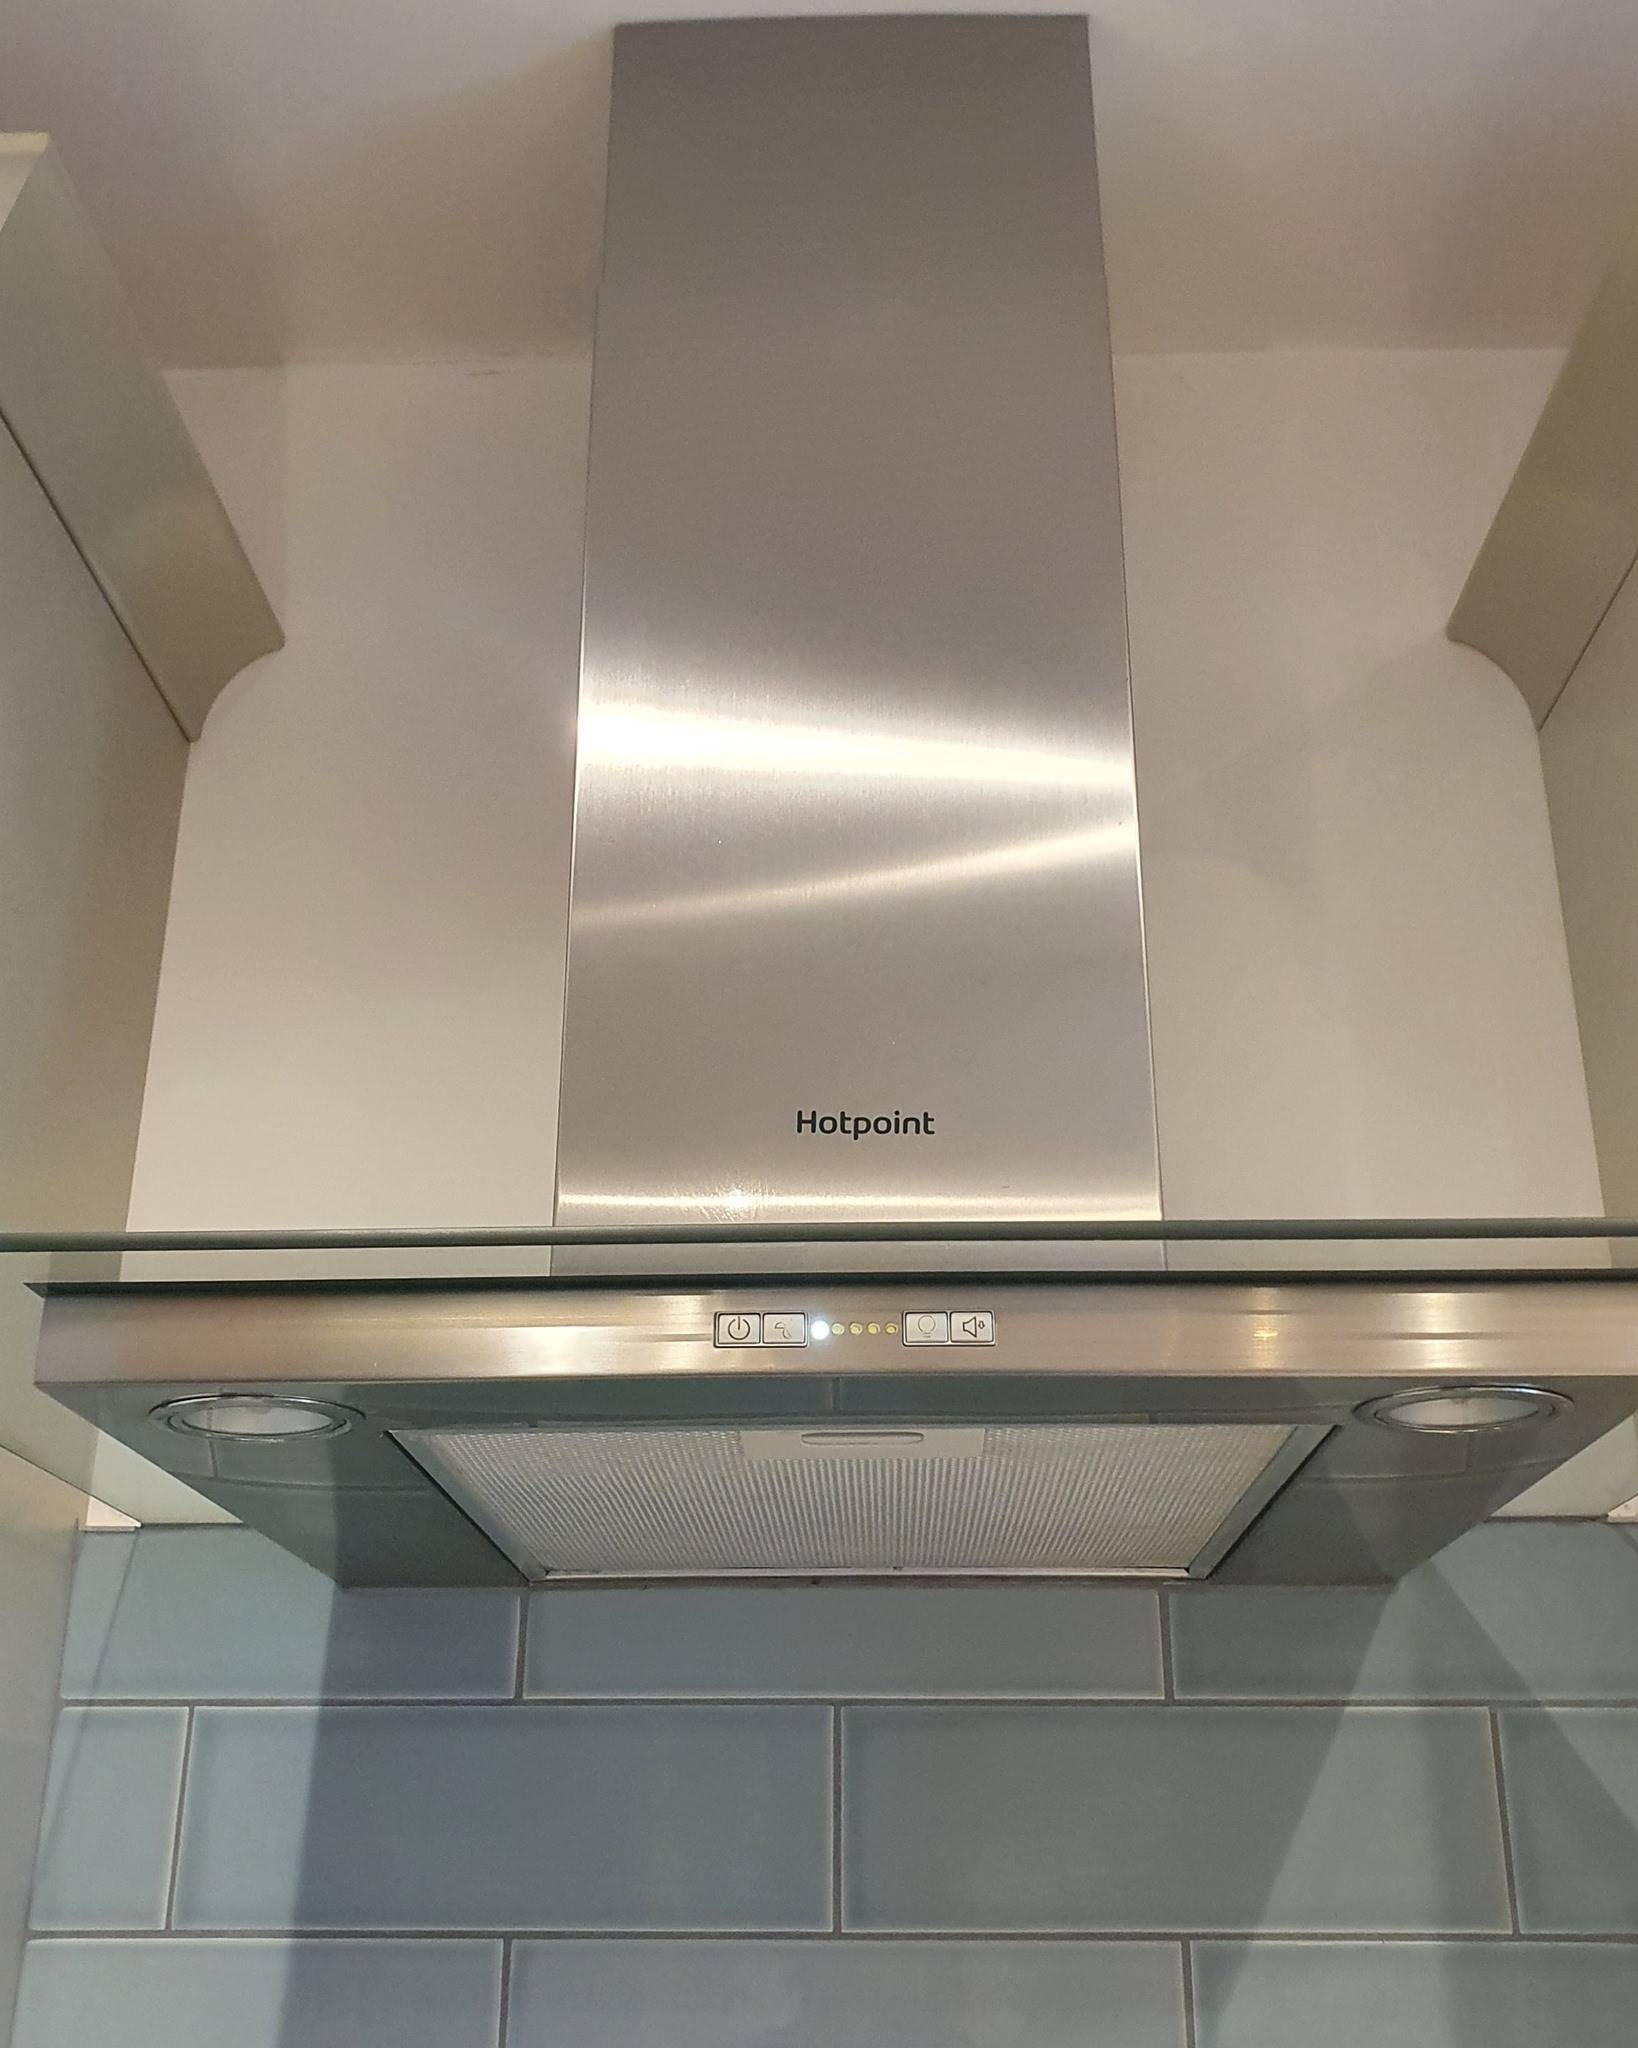 Cooker Hood Cleaning Northern Ireland | Clean Oven Belfast | Oven Cleaning NI | Oven Clean ni | Kitchen Cleaning NI | Oven Cleaning Belfast | Kitchen Appliance Cleaning Belfast | Oven Clean NI